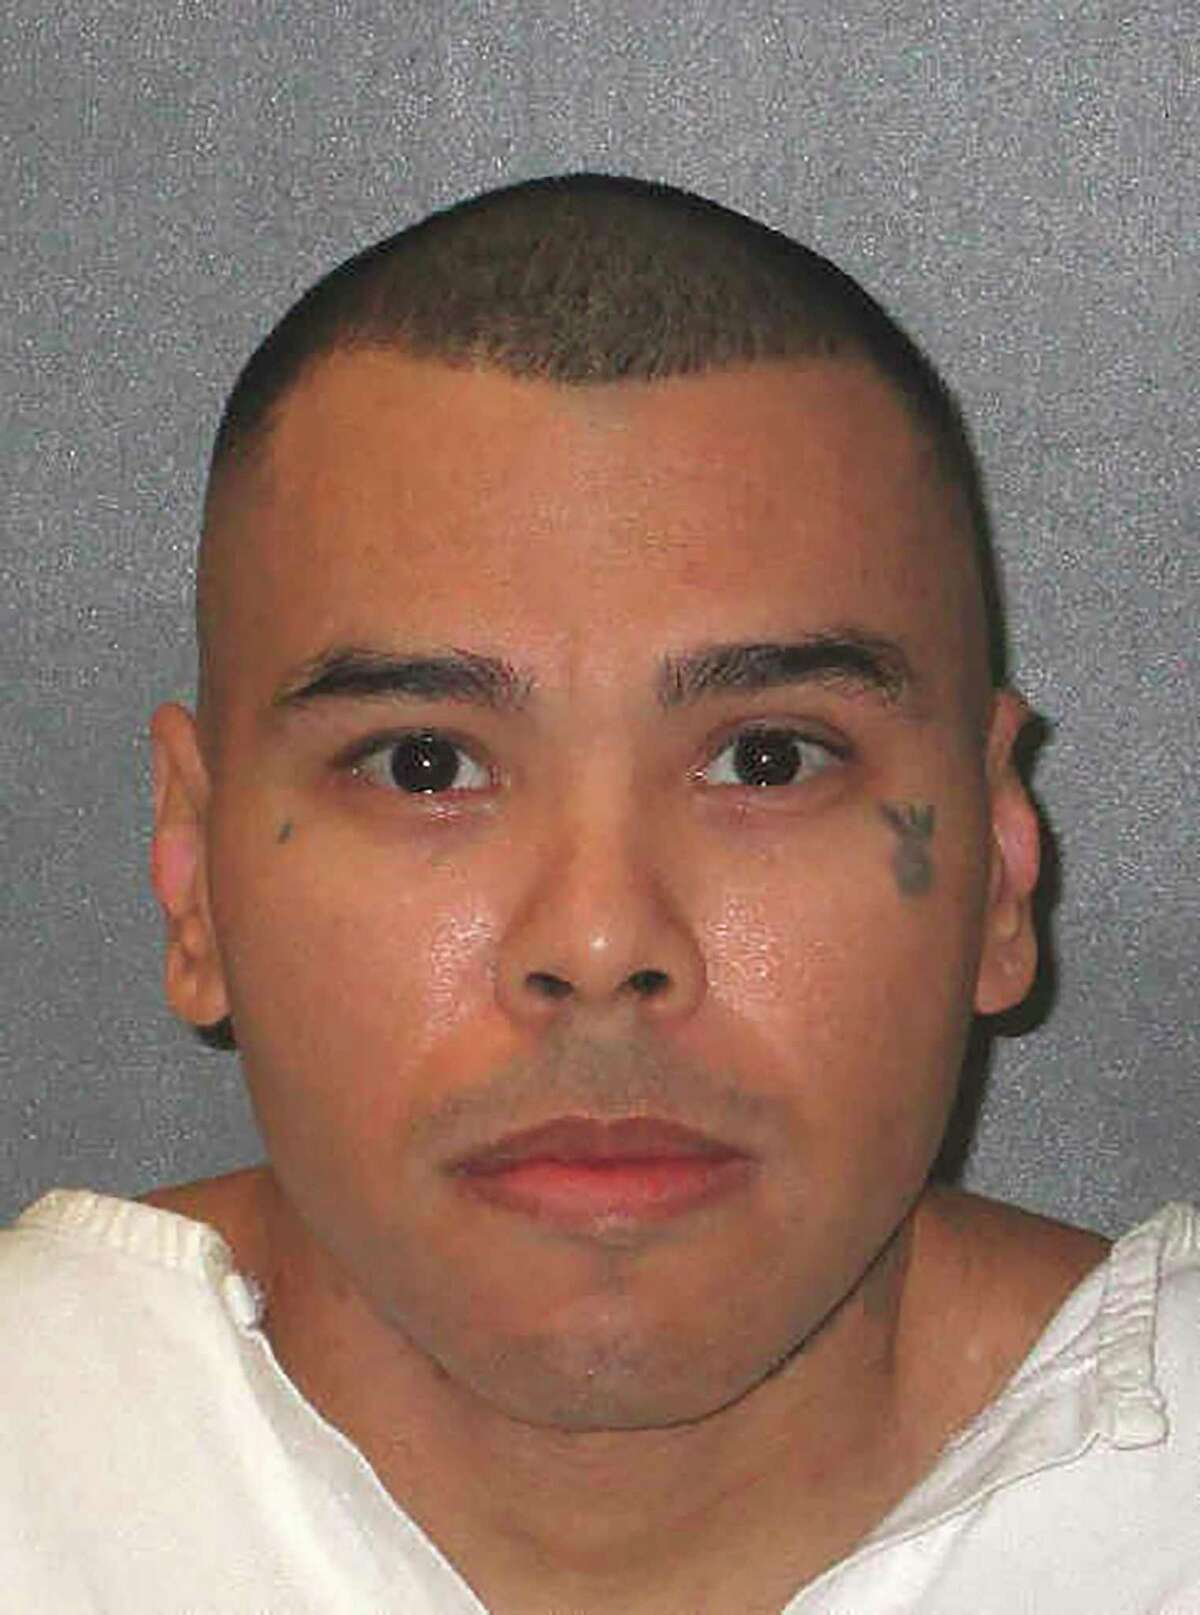 This image provided by the Texas Department of Criminal Justice shows Texas death row inmate Ramiro Gonzales, who is scheduled to be put to death July 13. Gonzales has asked that his execution be temporarily delayed so he can donate a kidney. (Texas Department of Criminal Justice via AP)